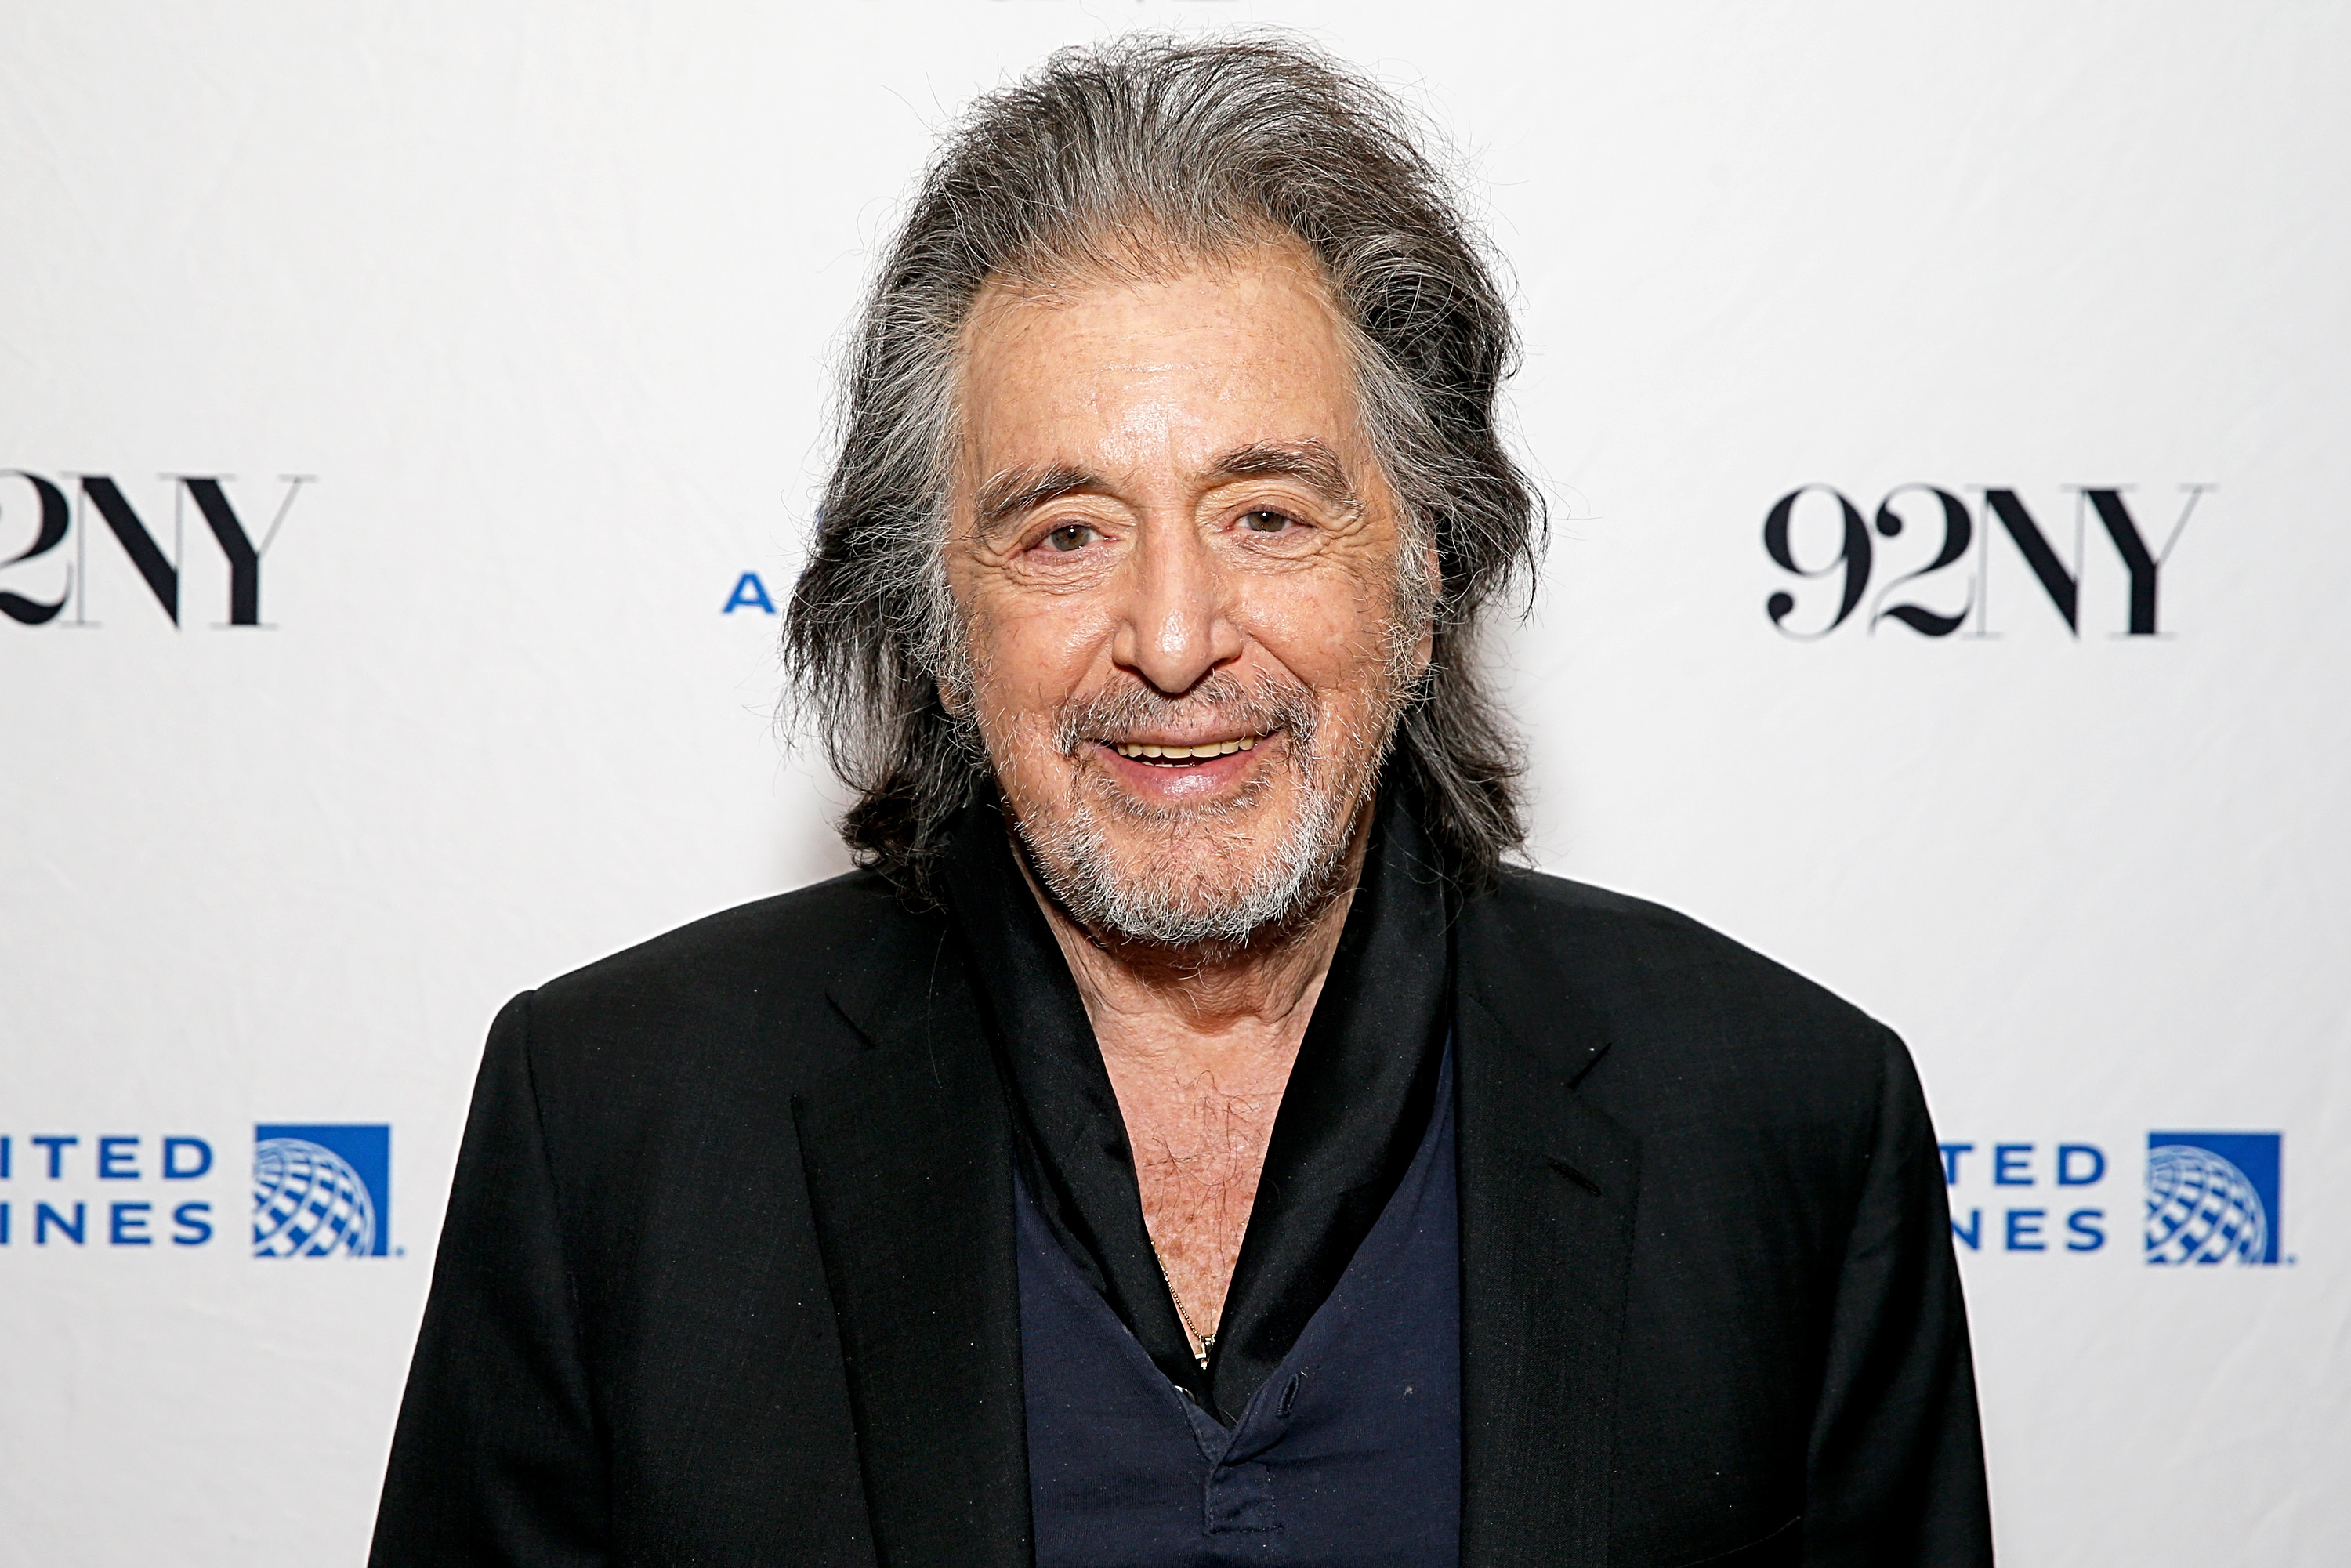 Al Pacino smiling in a suit at a 92NY event